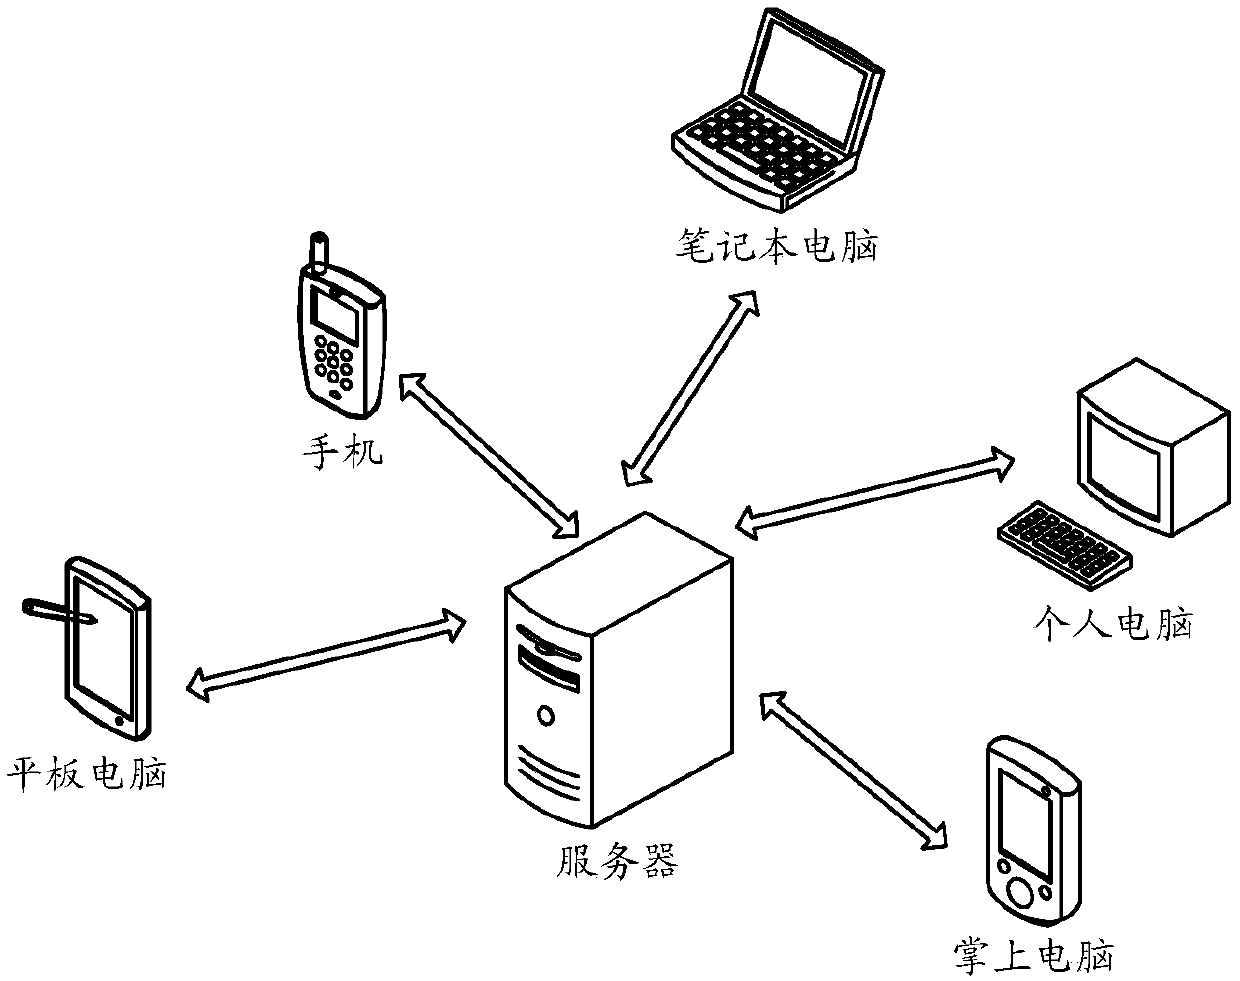 A text translation method and related device